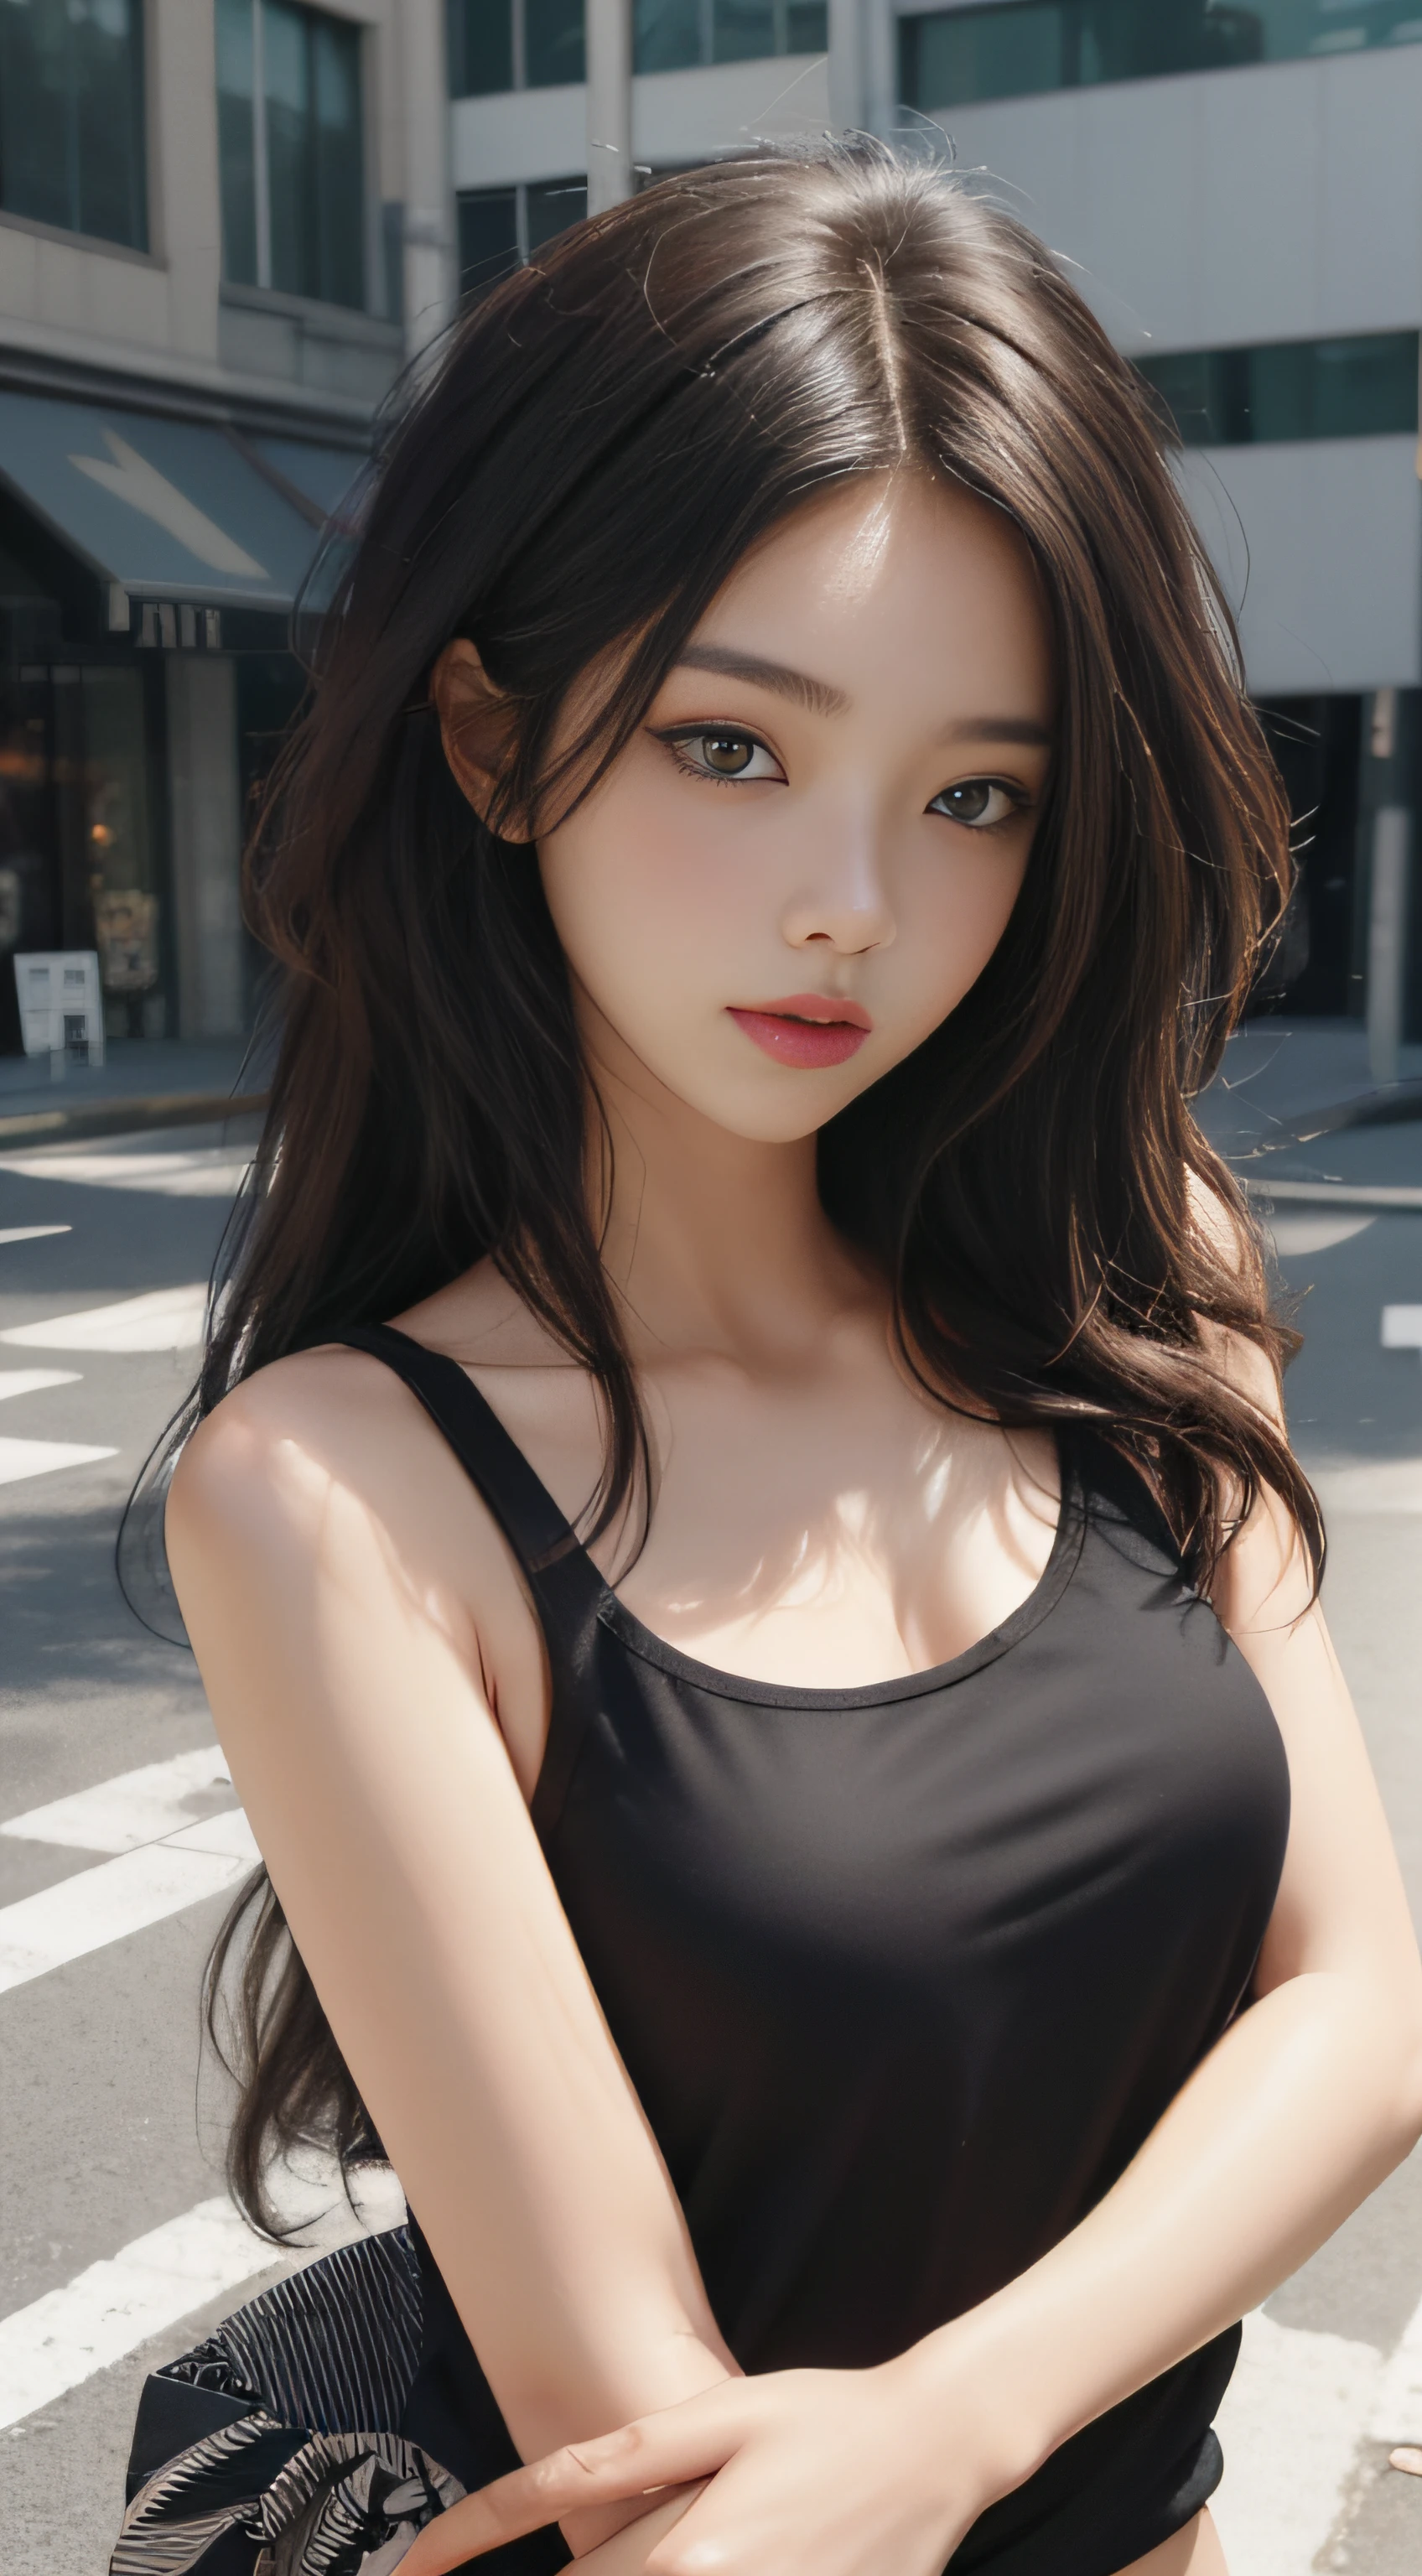 （Magazine cover style illustration of a vibrant, stylish woman dressed），((Best quality, 8K, Masterpiece :1.3)), Sharp focus :1.2, perfect figure beautiful woman:1.4, Slim abs:1.2, ((Layered Hair Style,)), (Tank top shirt:1.1 ), (the street:1.2), Highly detailed facial and skin texture, A detailed eye, double eyelid,MagazineCover